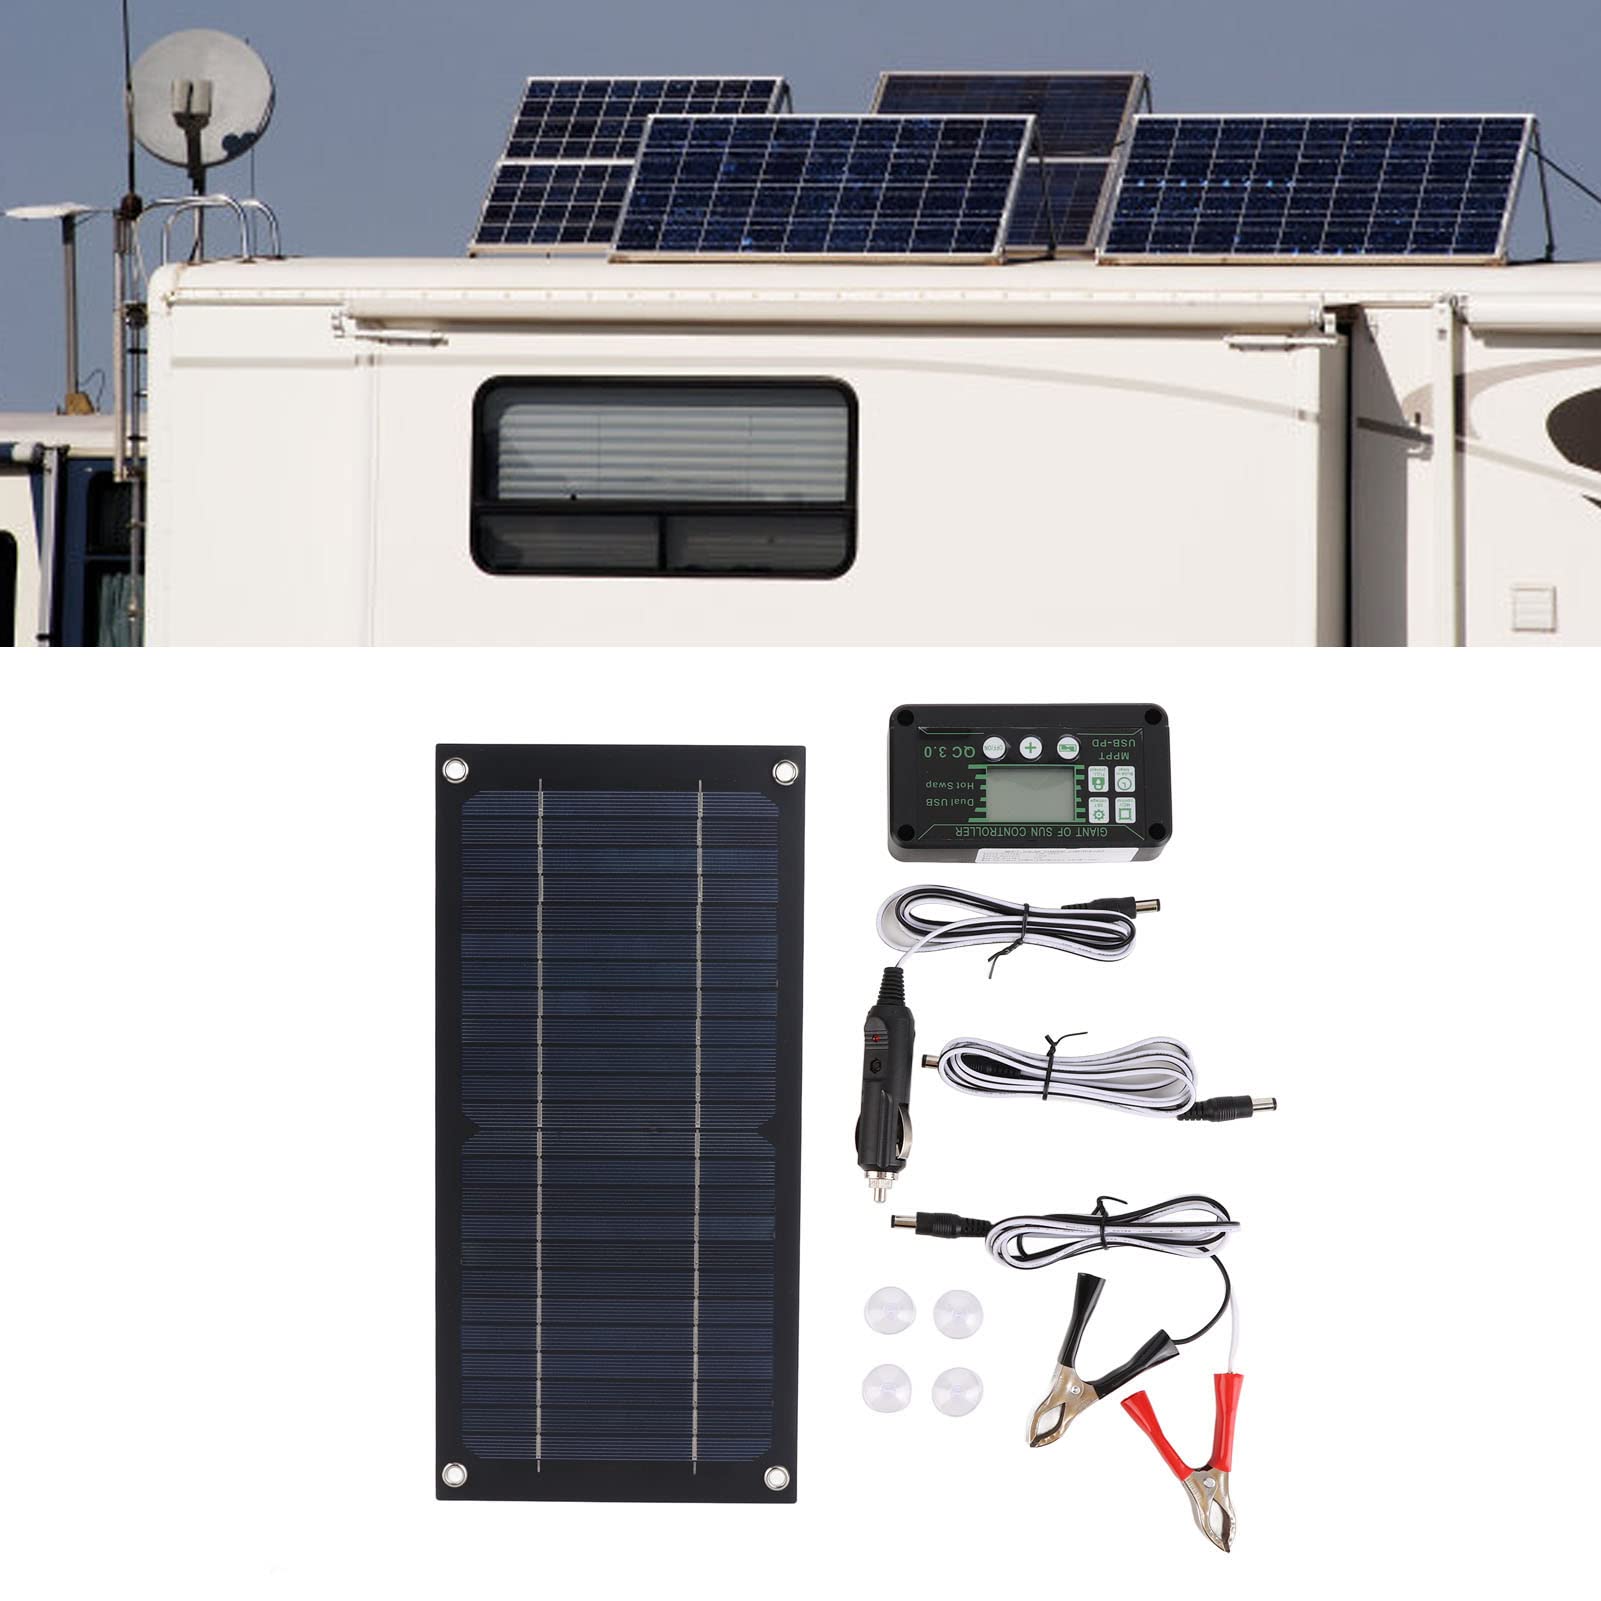 Solar Panel Kit, 600W Solar Panel Charger Monocrystalline Silicon 100A Charge Controller Solar Panel Kit with Extension Cable Battery Clip for RV Outdoor Camping